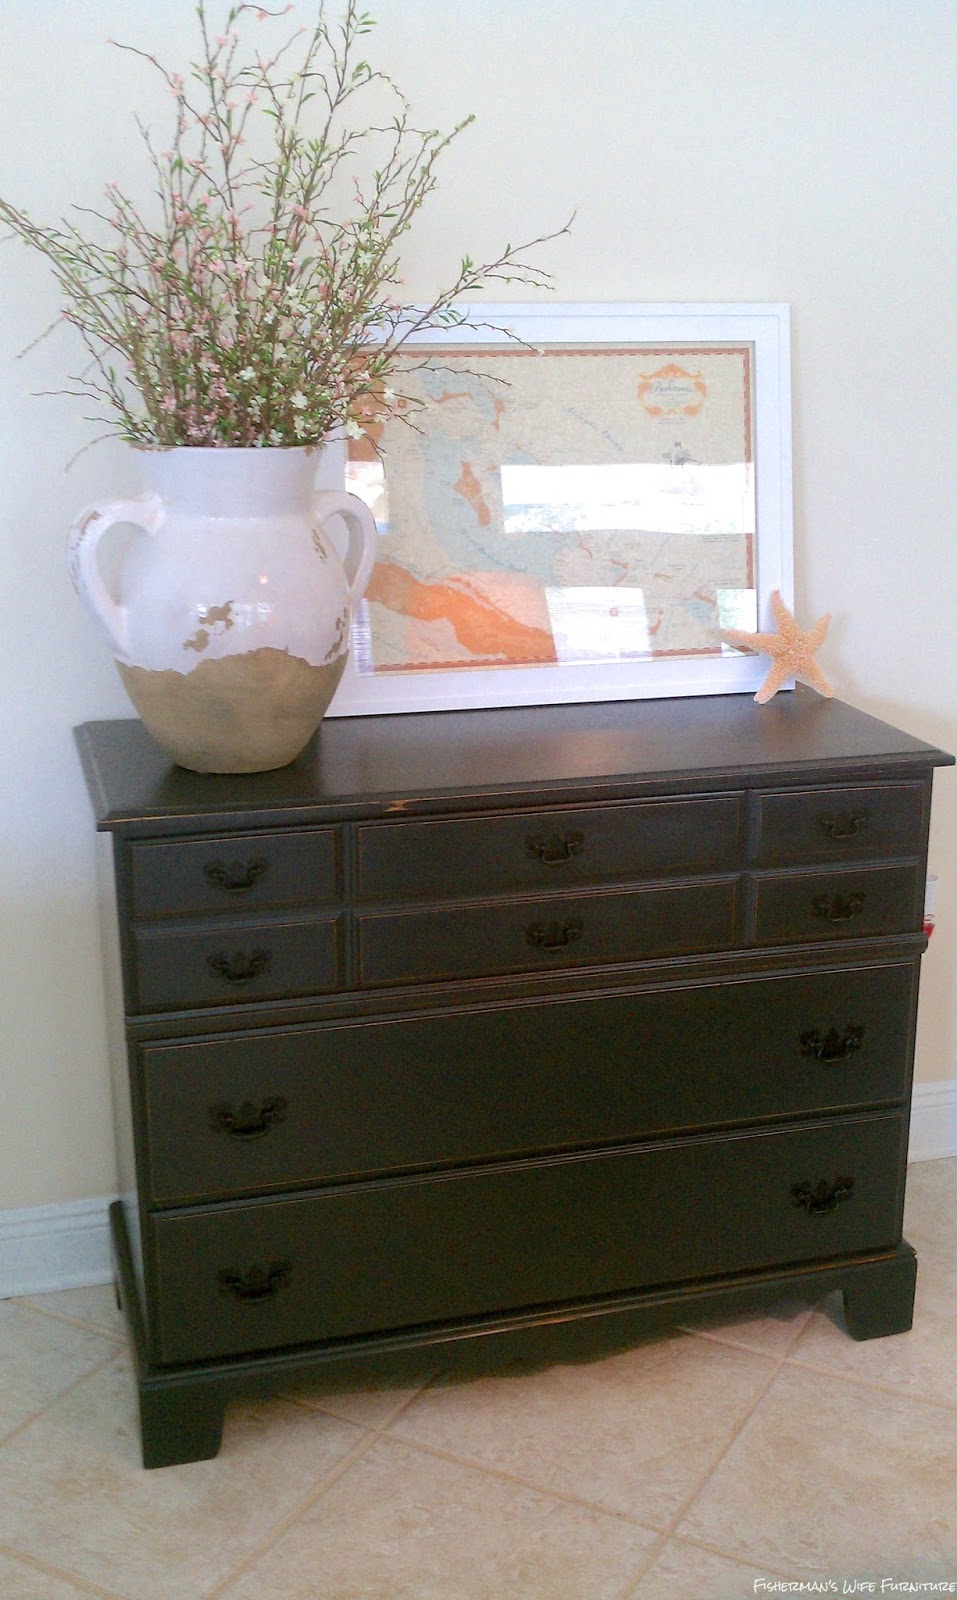 Fisherman S Wife Furniture The Grey Pottery Barn Inspired Dresser